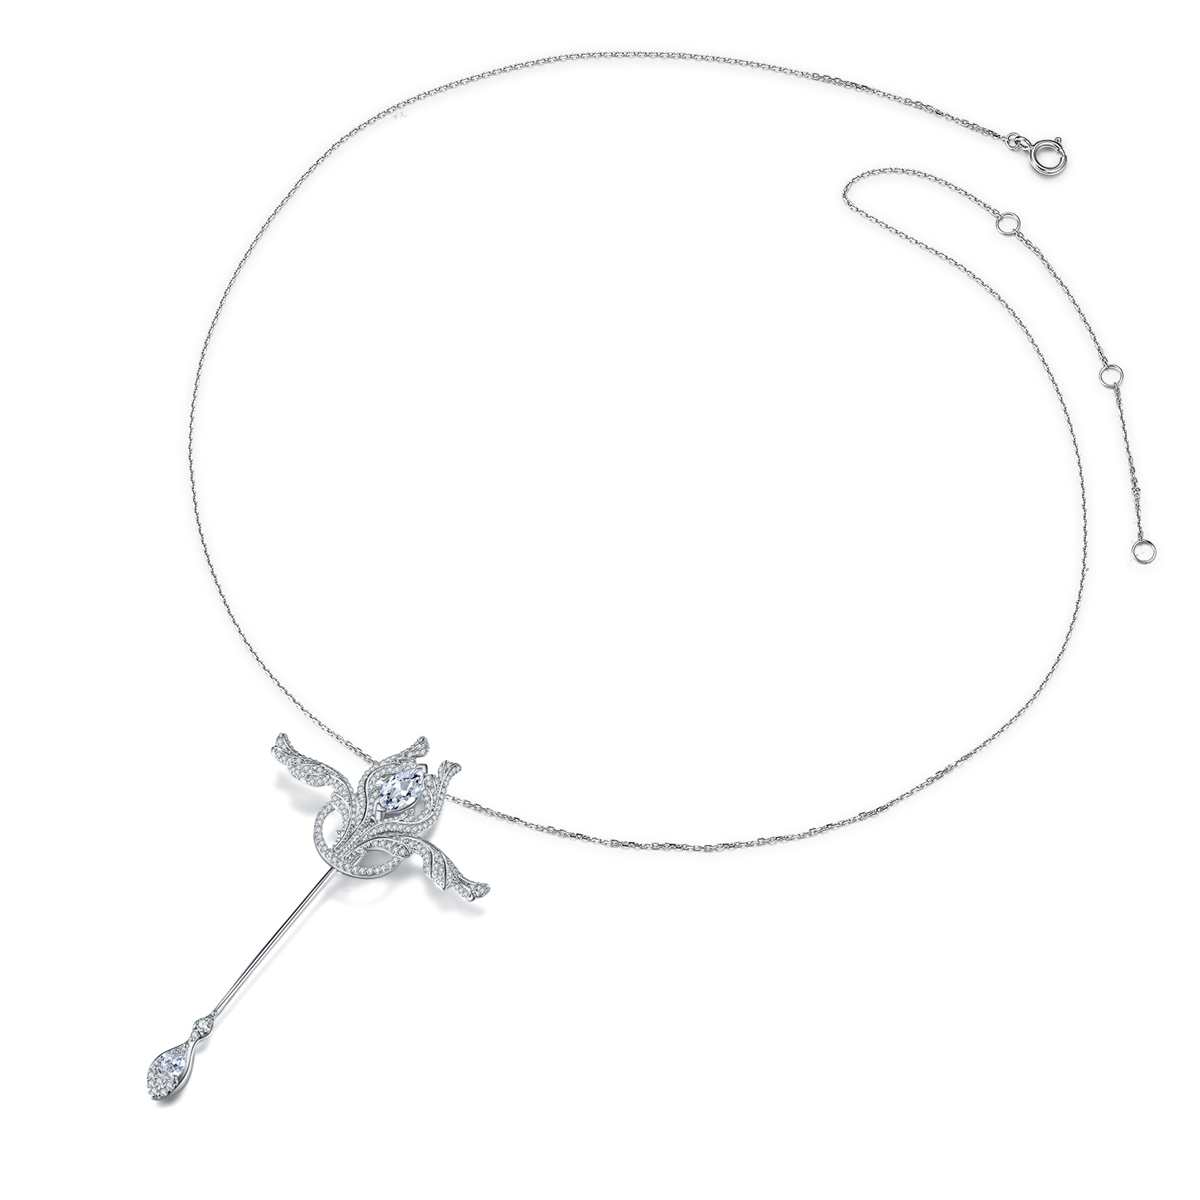 Silver-white lady's ins-style original angel scepter S925 silver necklace and choker double-wear sweater chain can be used as a brooch for daily use